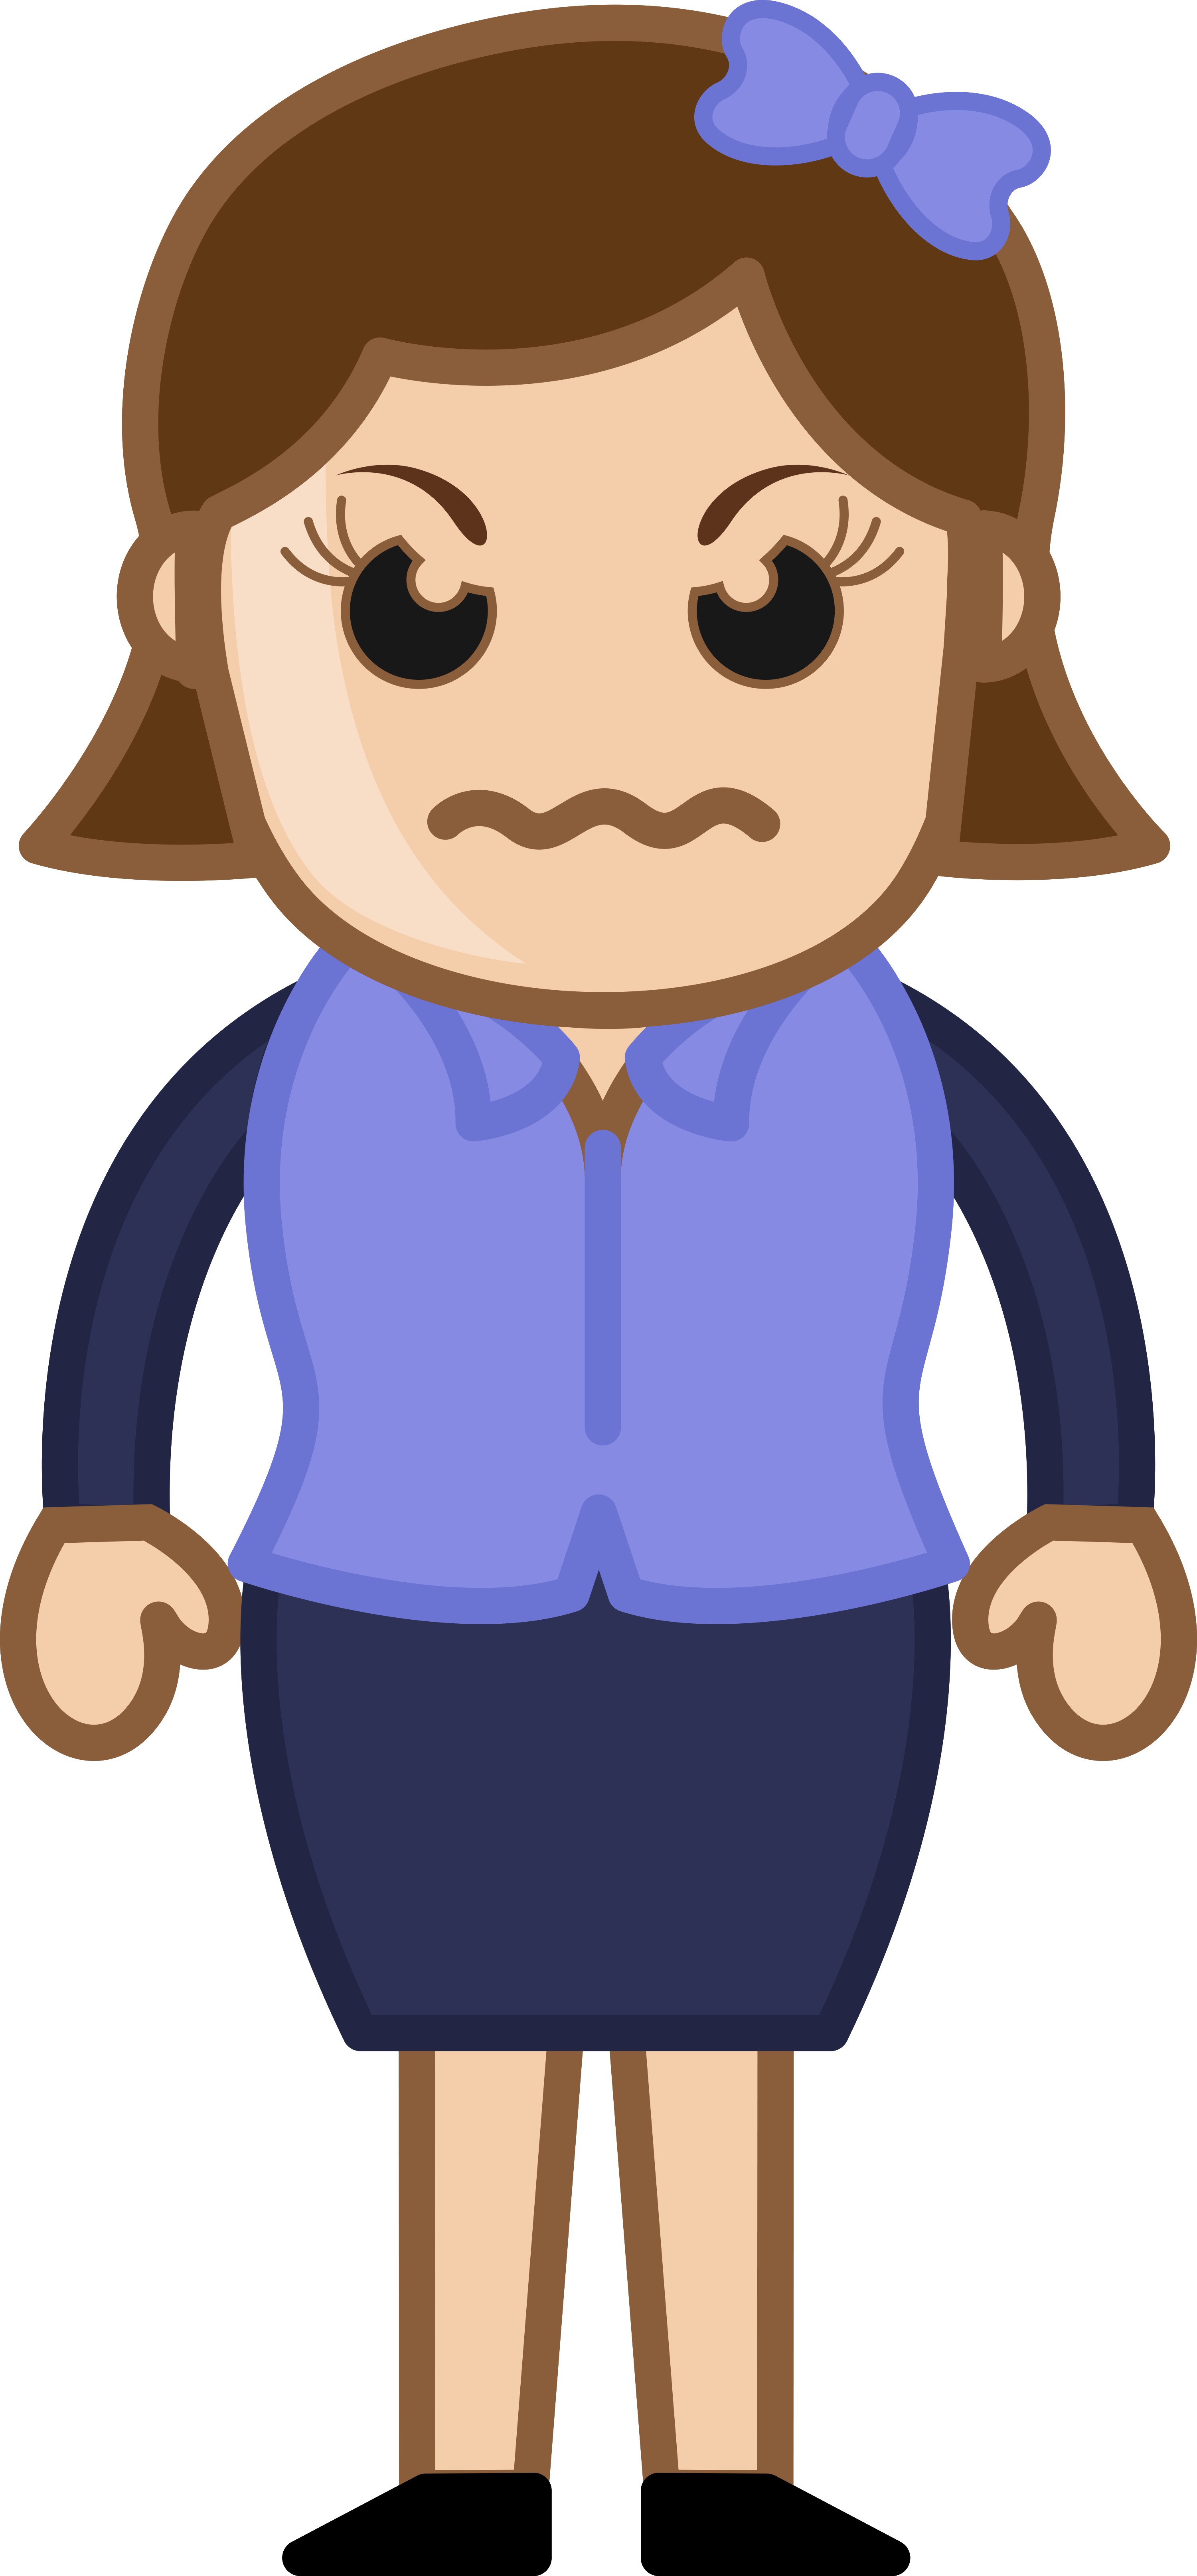 Download angry-woman-business-cartoon-character-vector_GJc-4J ...